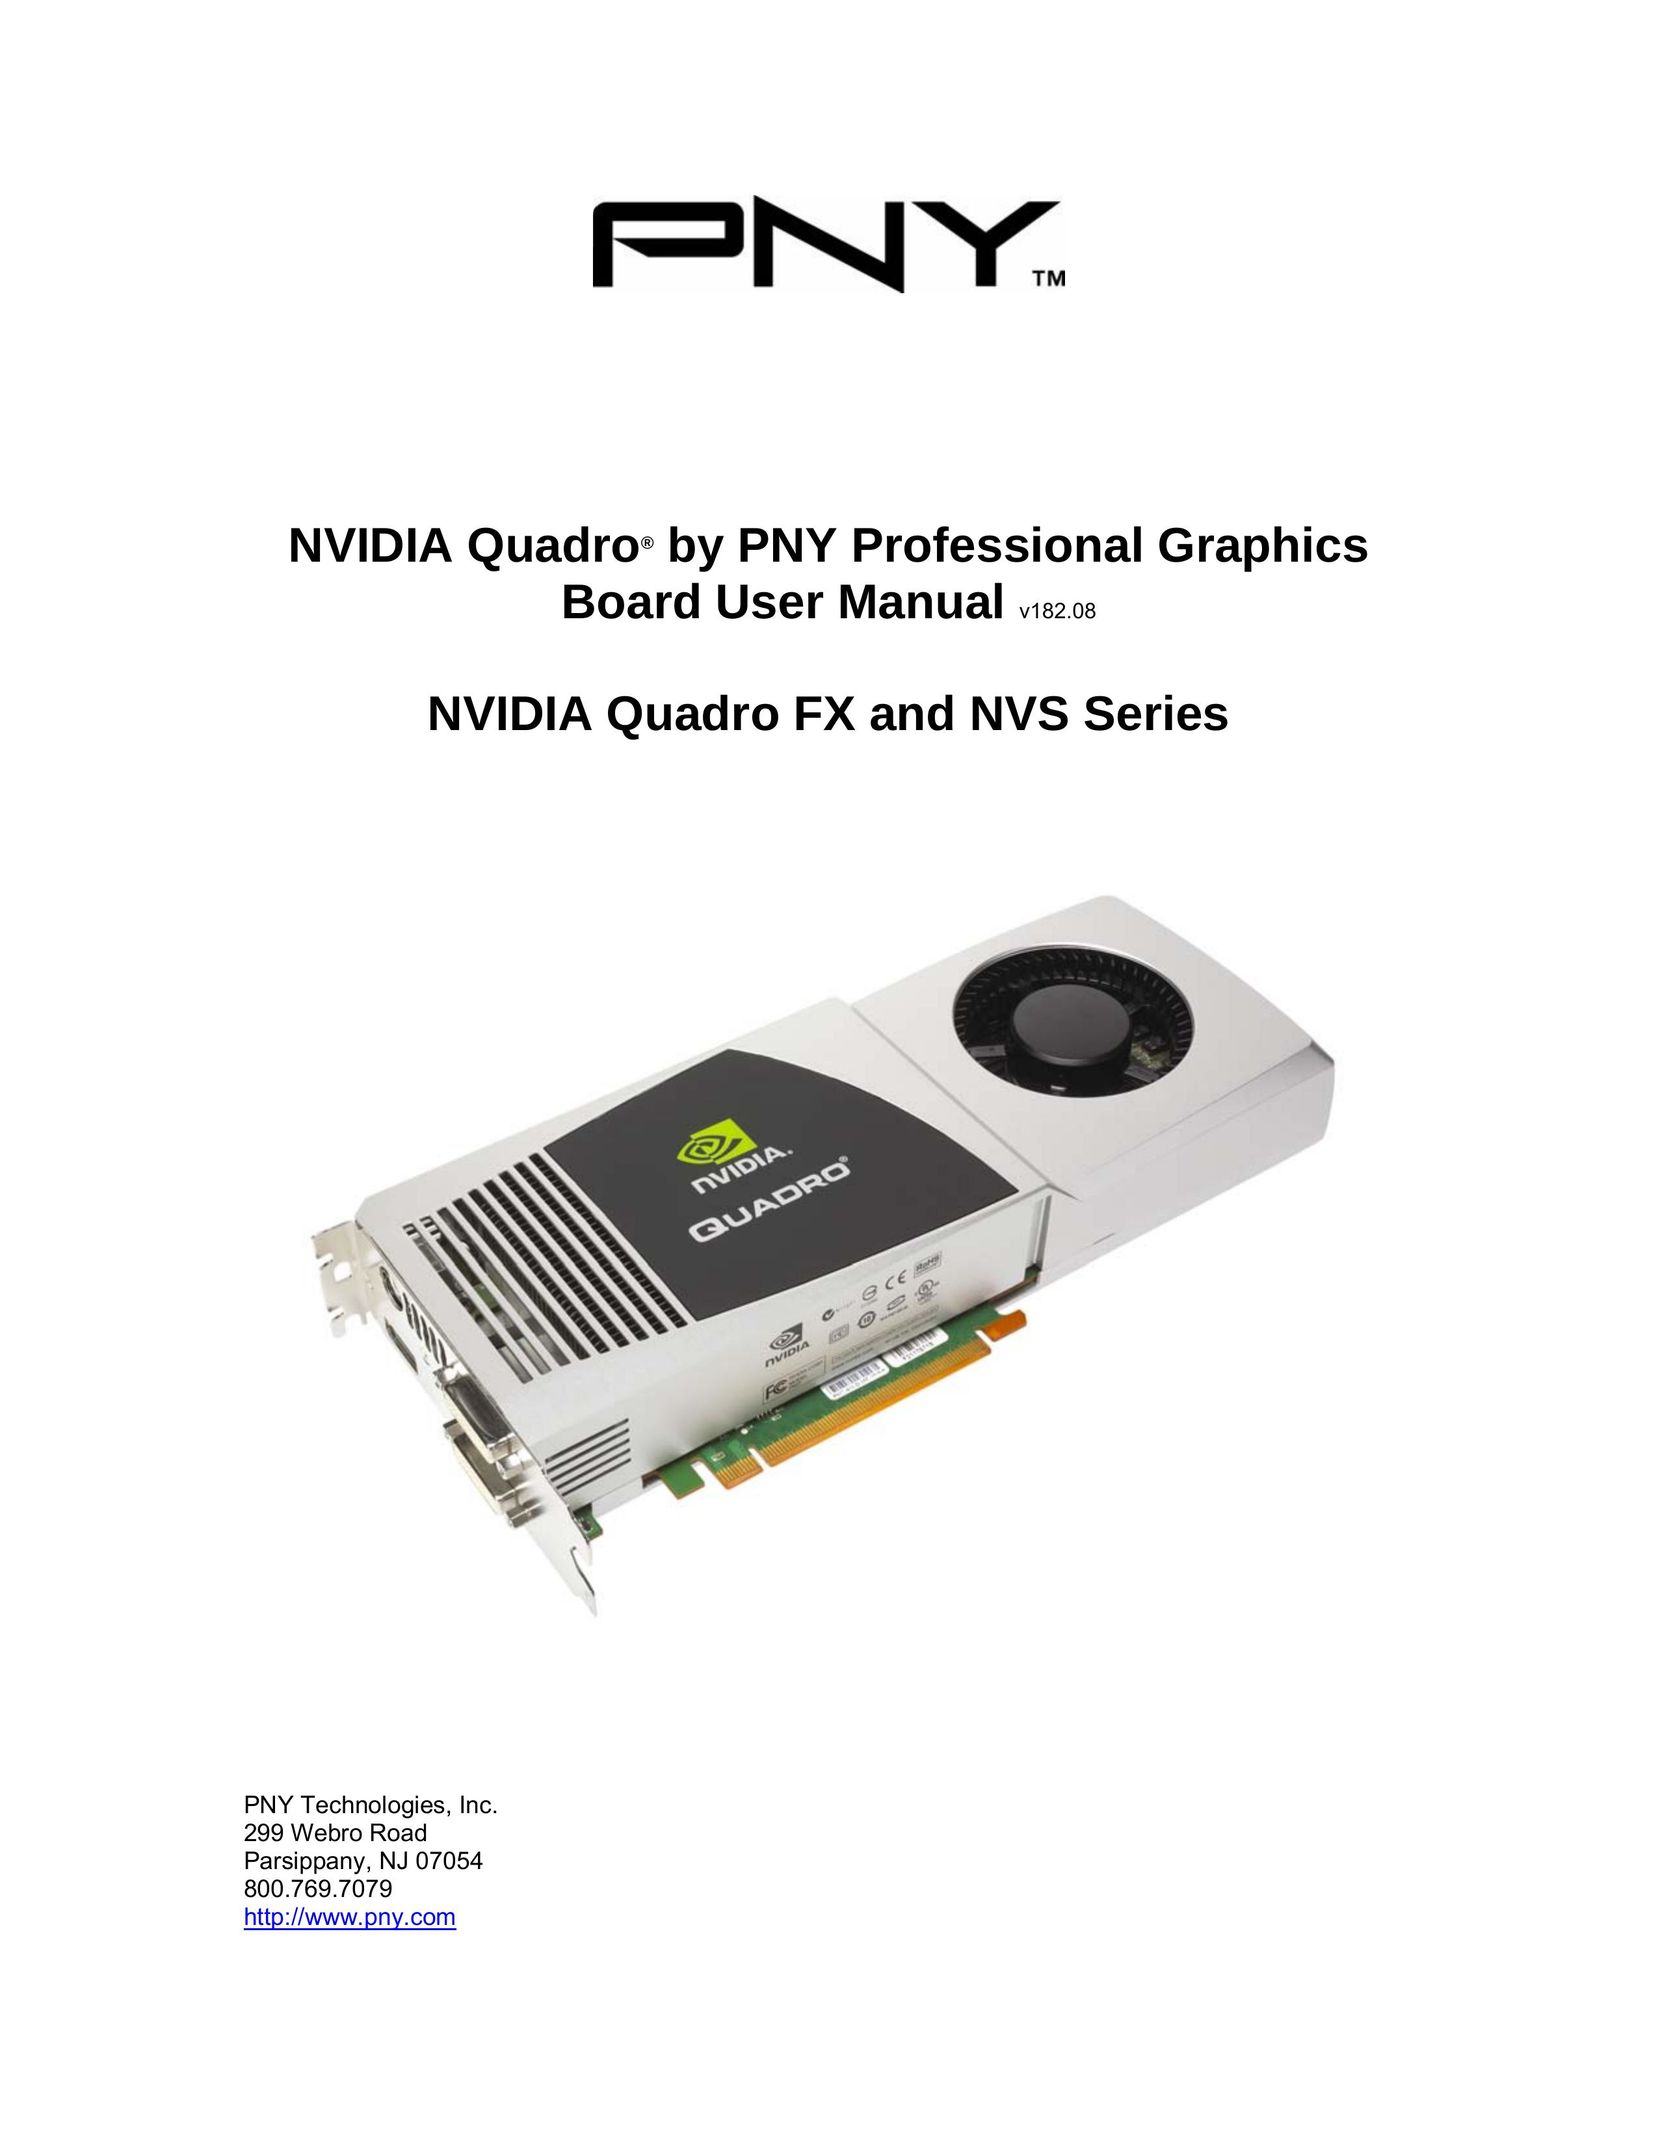 PNY FX 4600 Computer Hardware User Manual